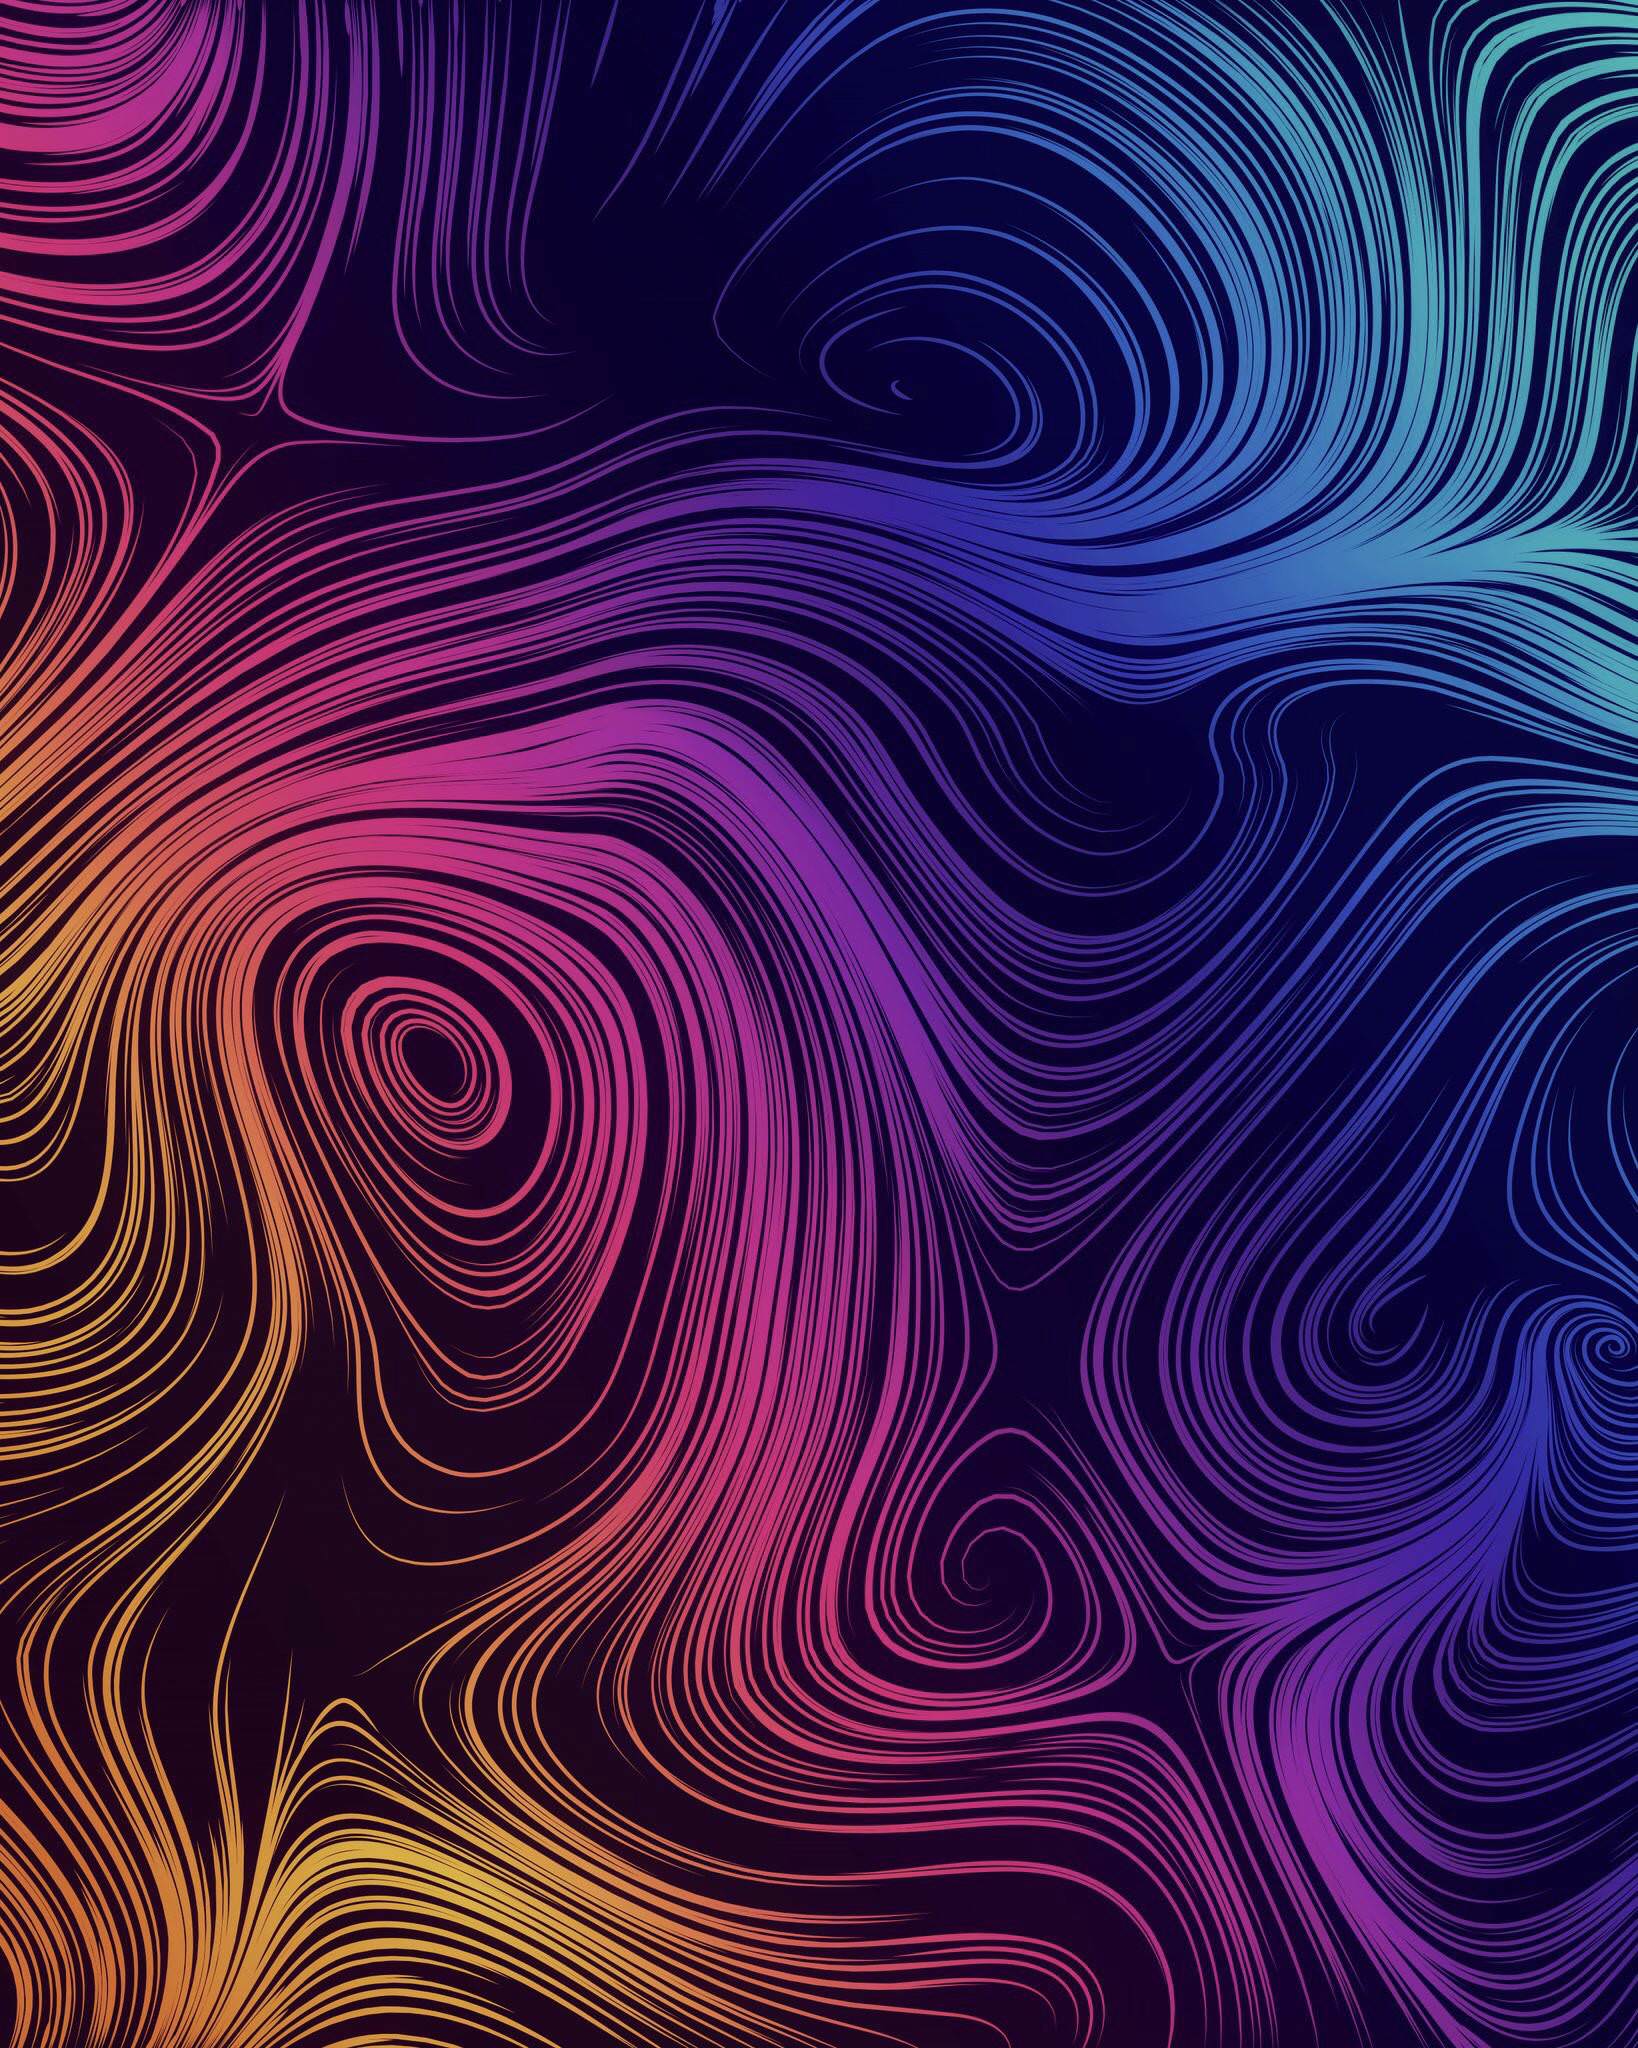 Is This The Galaxy S9 Wallpaper From MkbHD Iwallpaper